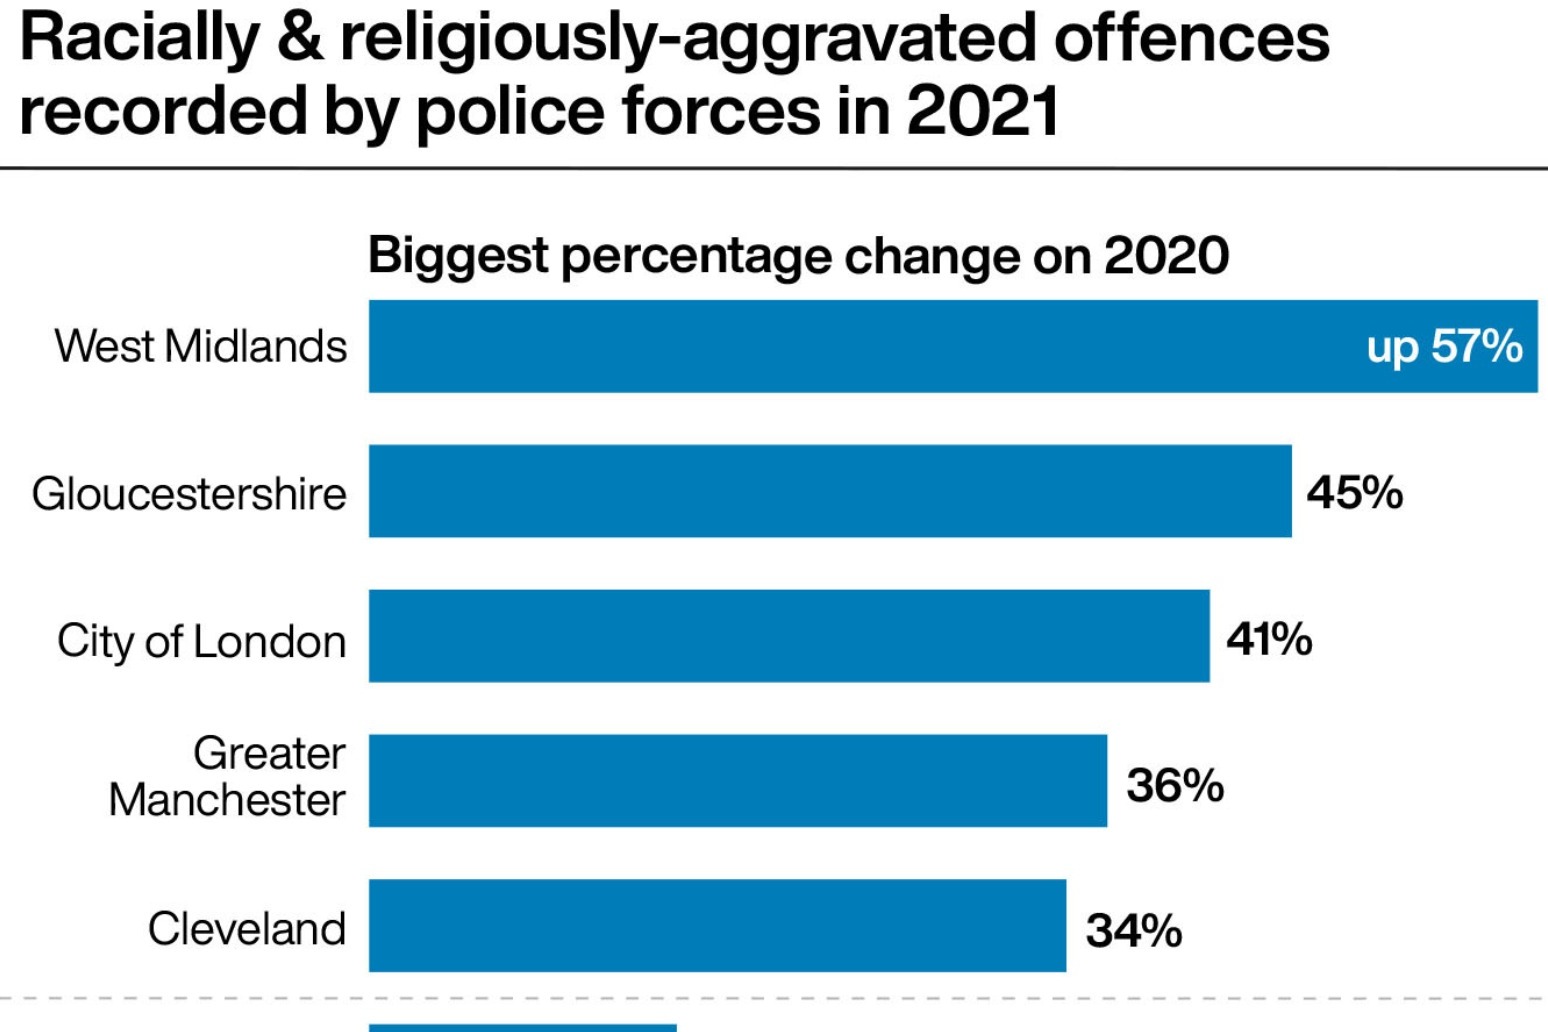 Race and religious hate offences recorded by police hit new high in 2021 